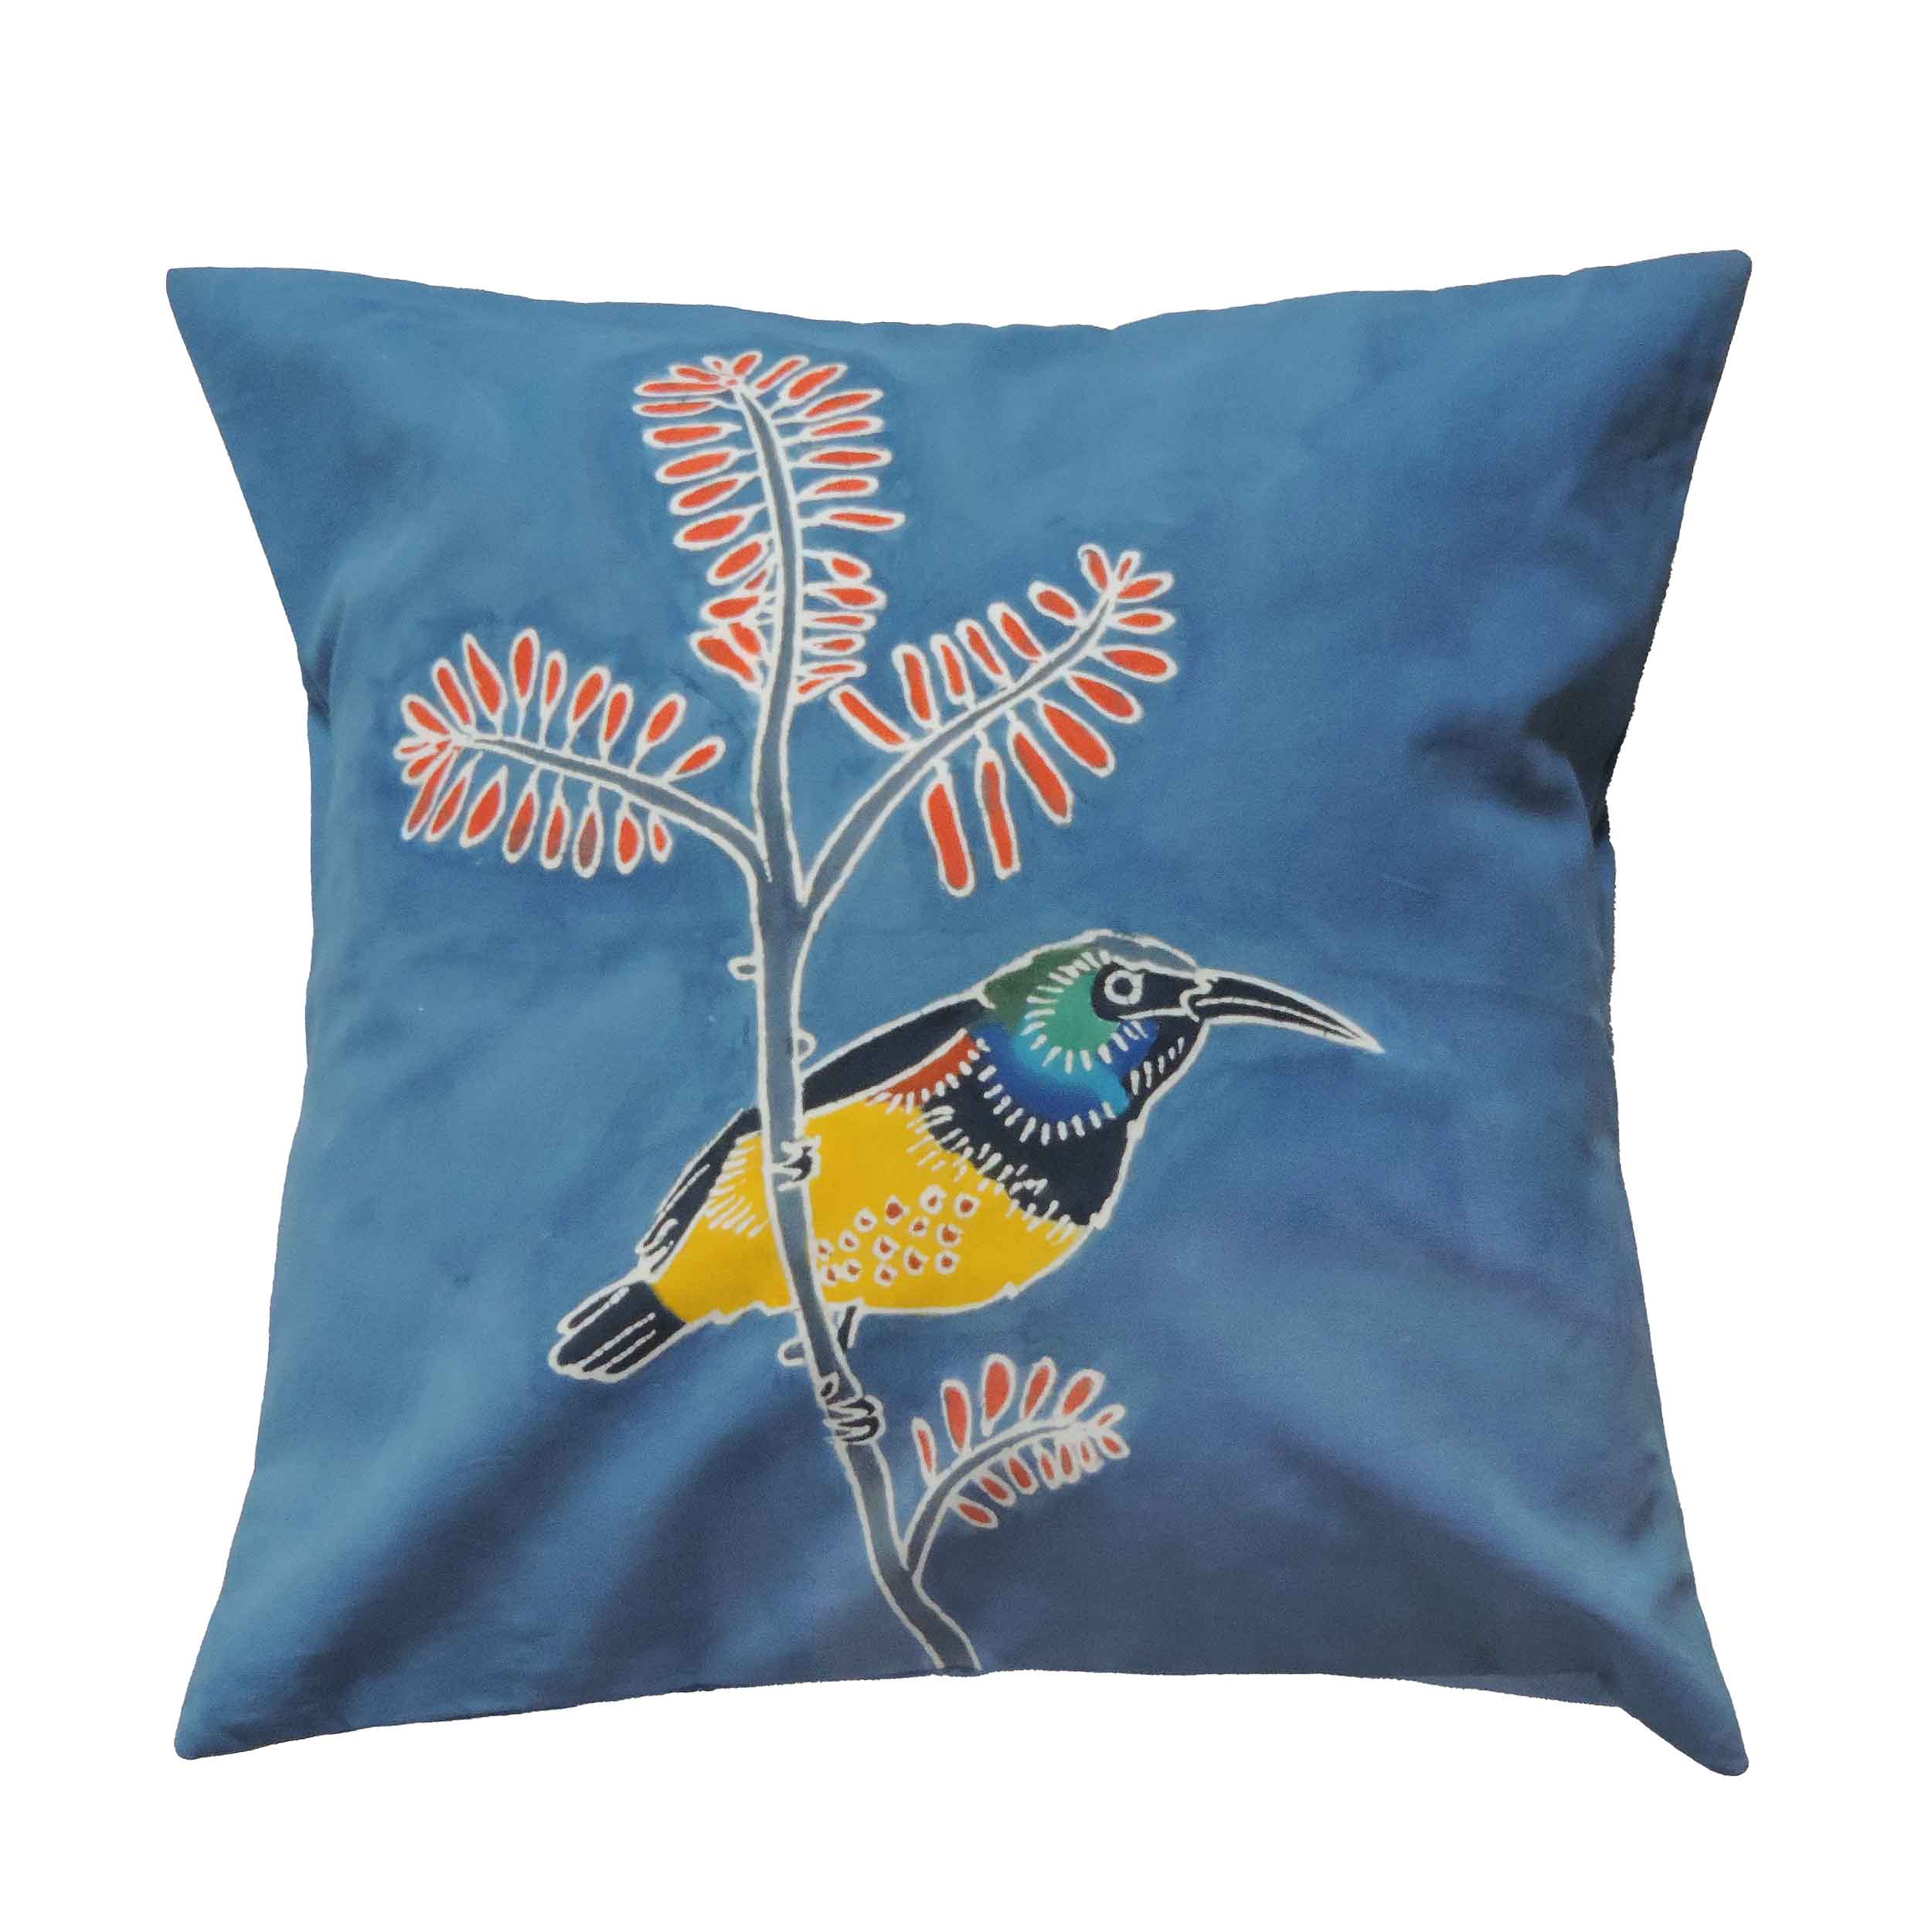 Papiko Sunbird Cushion Cover - Hand Painted by TRIBAL TEXTILES - Handcrafted Home Decor Interiors - African Made